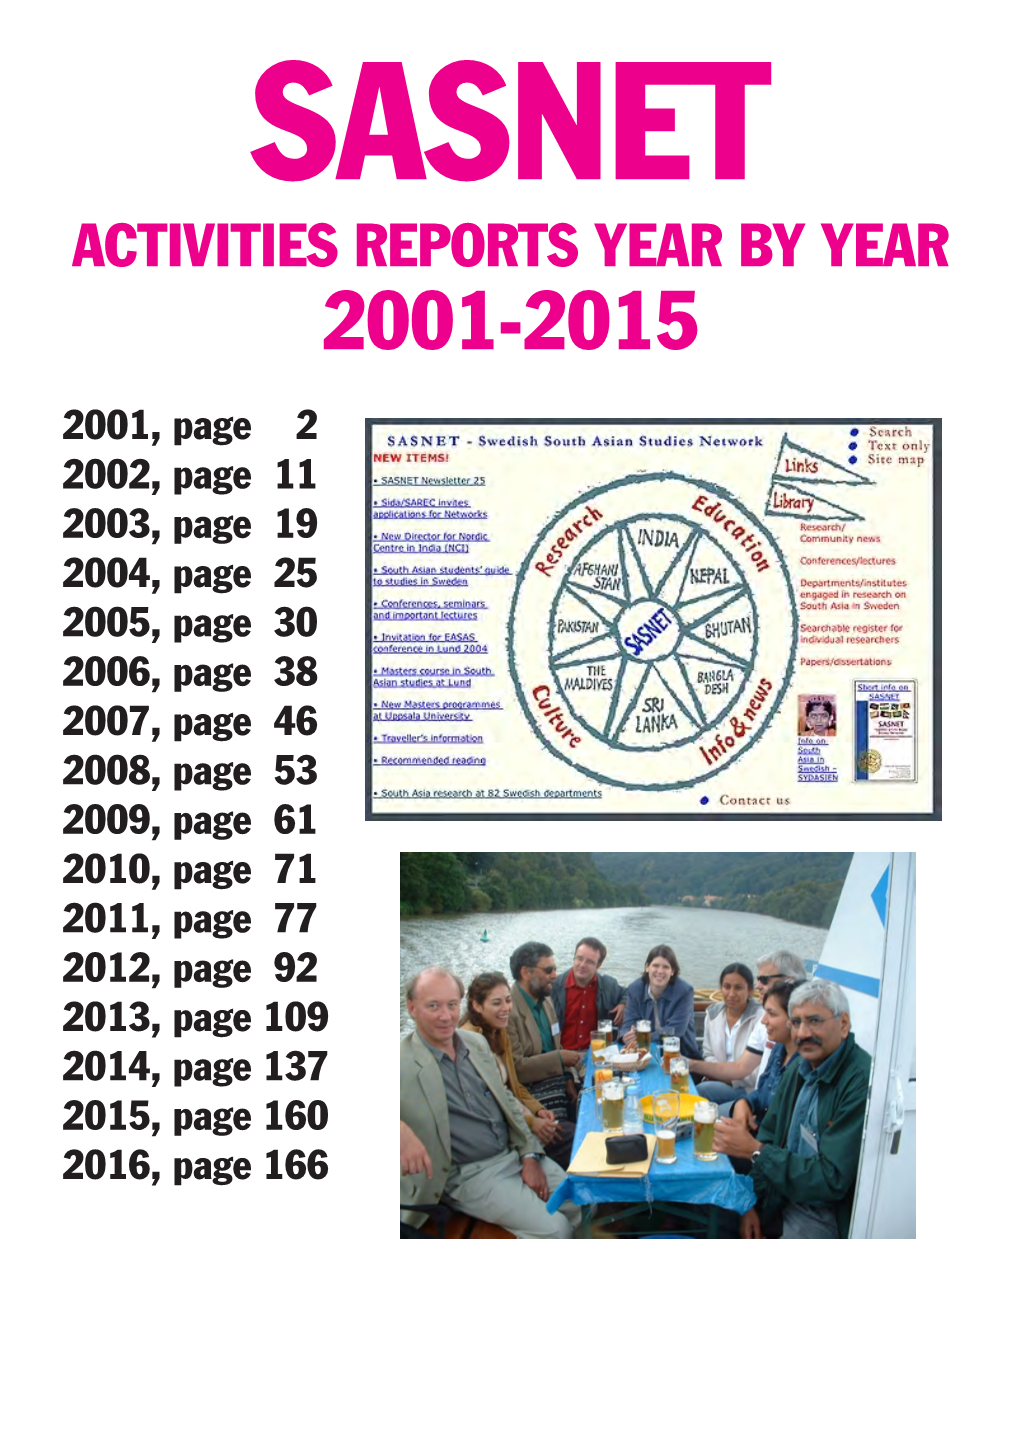 Activities Reports Year by Year 2001-2015